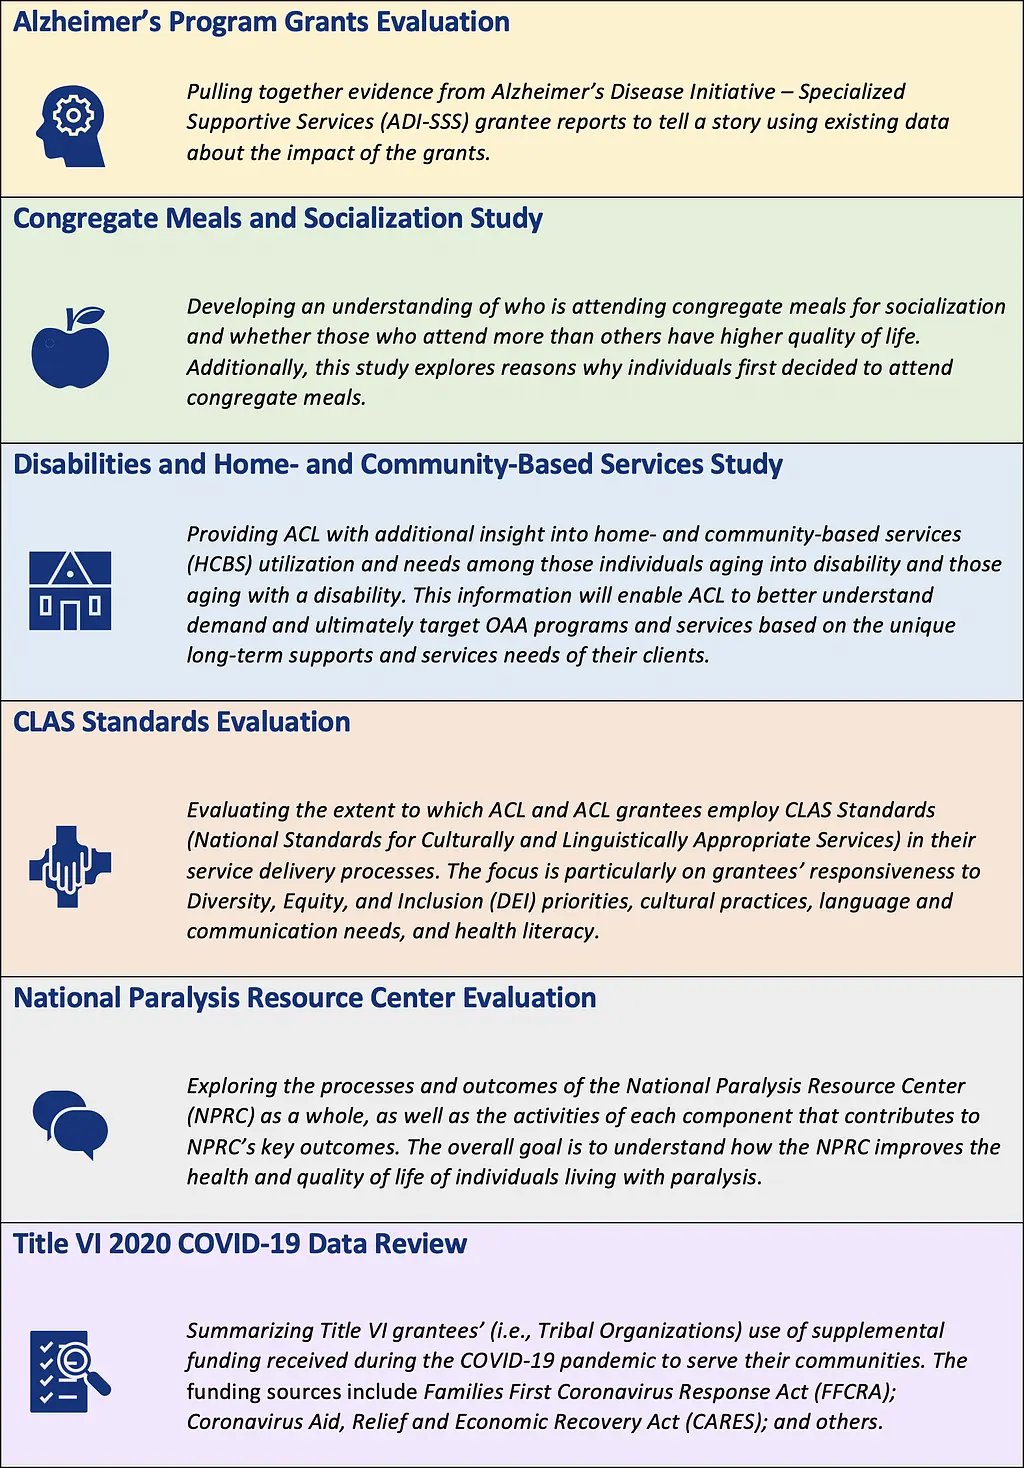 Graphic shows the goals of a project to research programs for the Administration for Community Living.